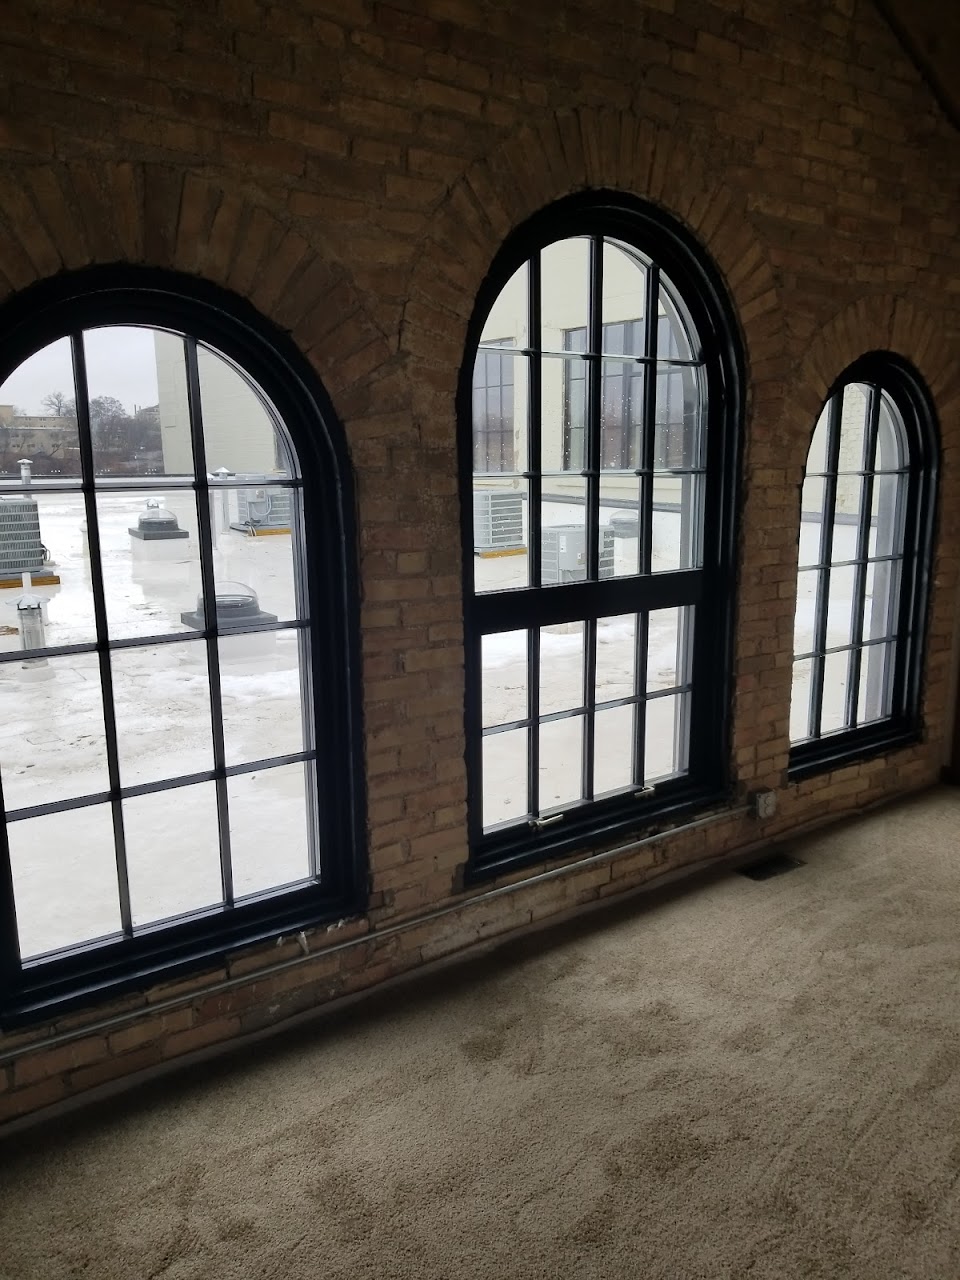 Photo of WOOLEN MILLS LOFTS at 218 E SOUTH ISLAND ST APPLETON, WI 54915